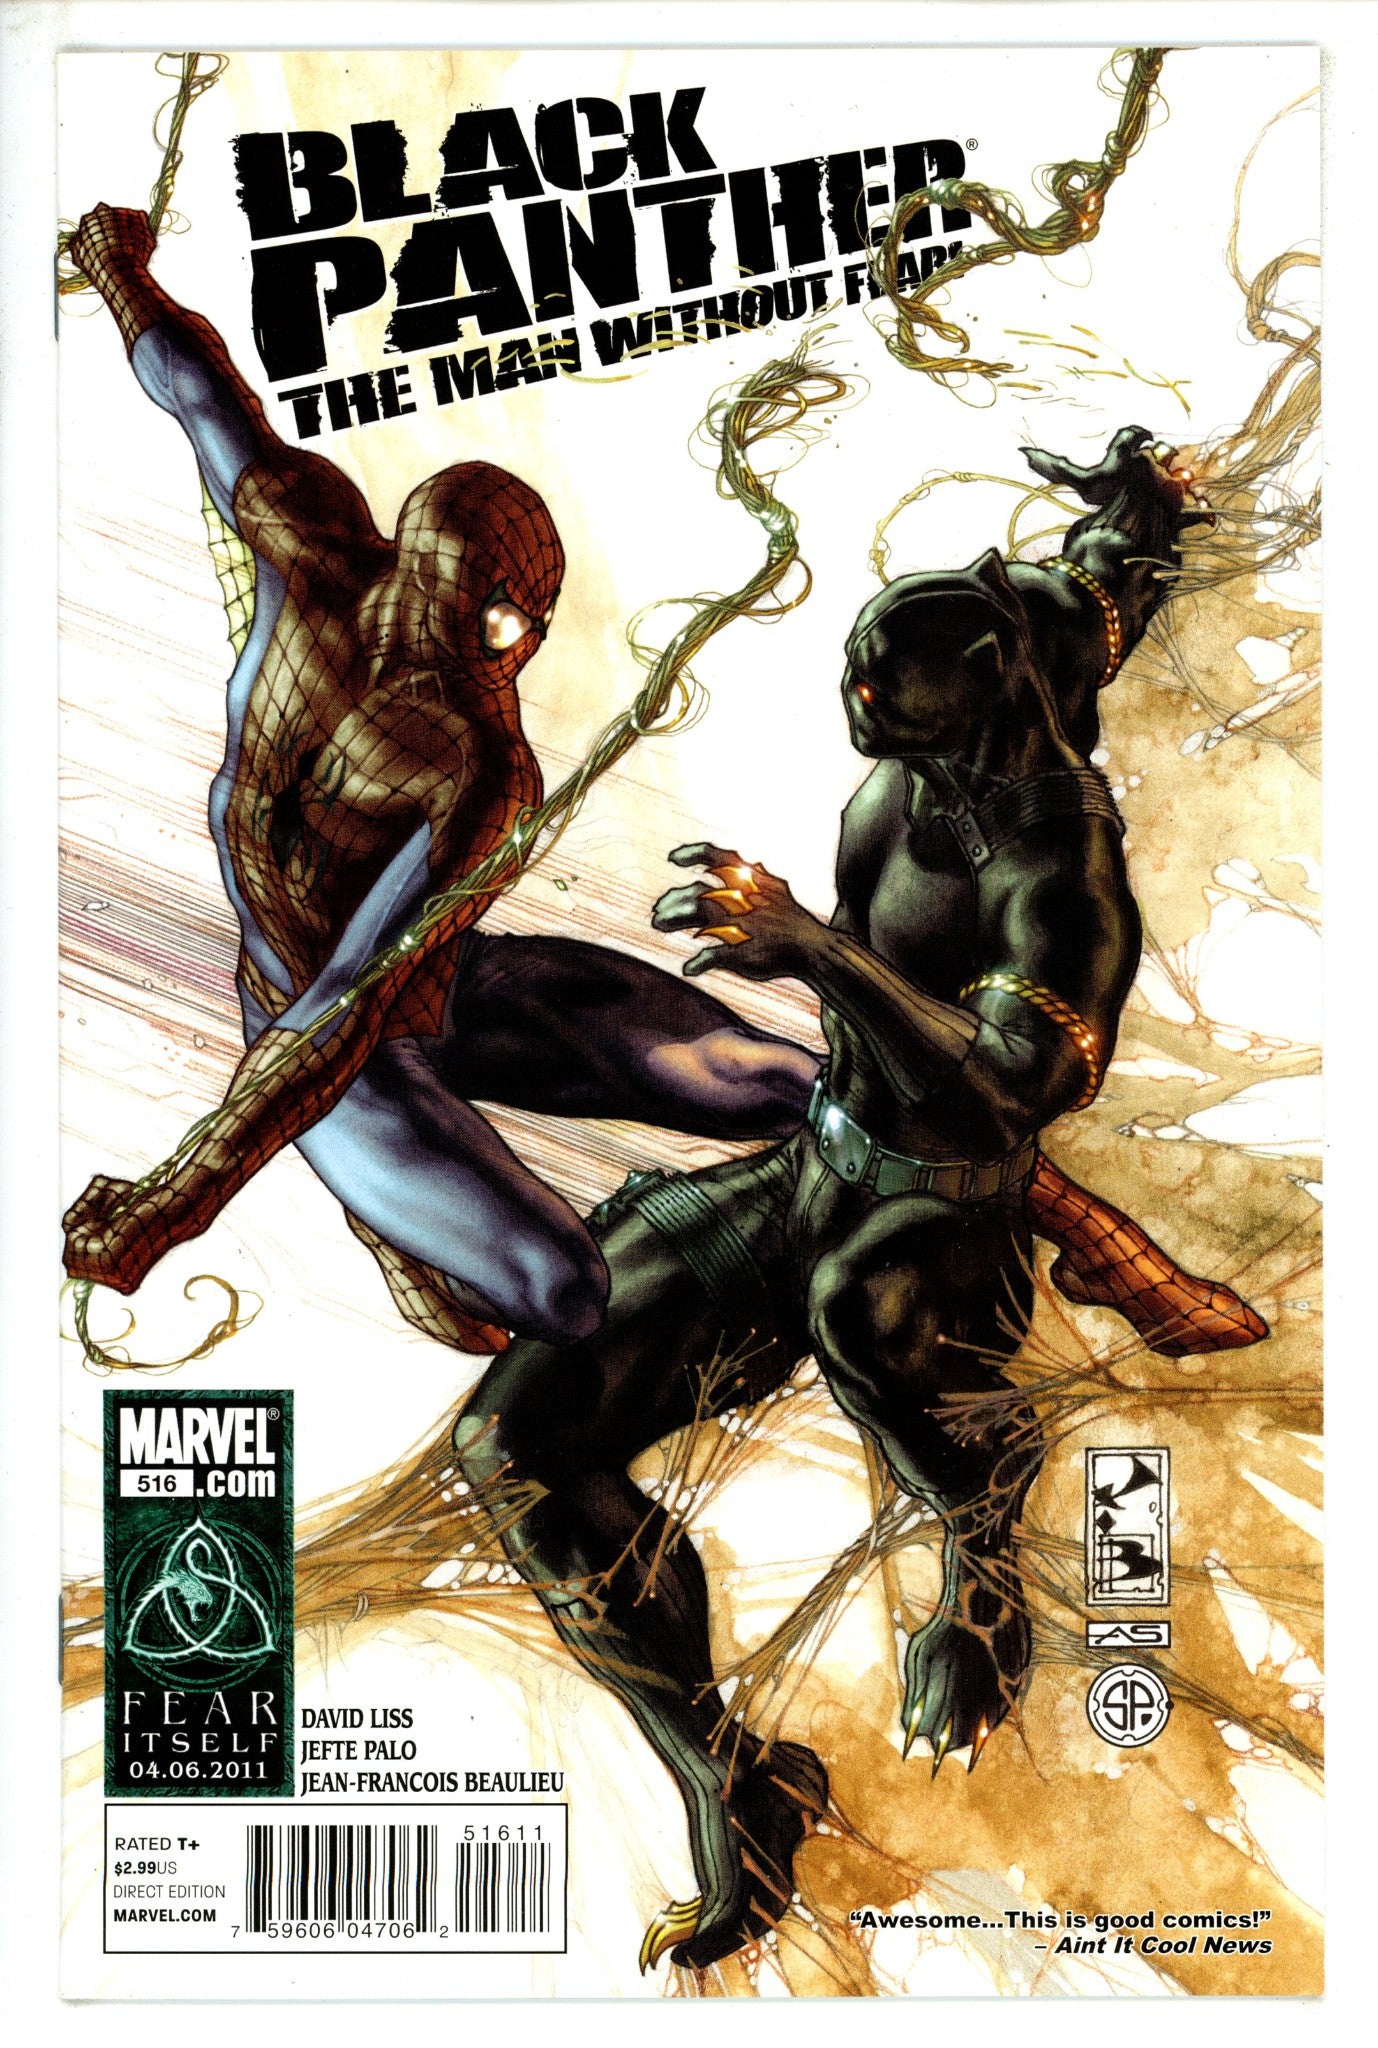 Black Panther: The Man without Fear 516 (2011)